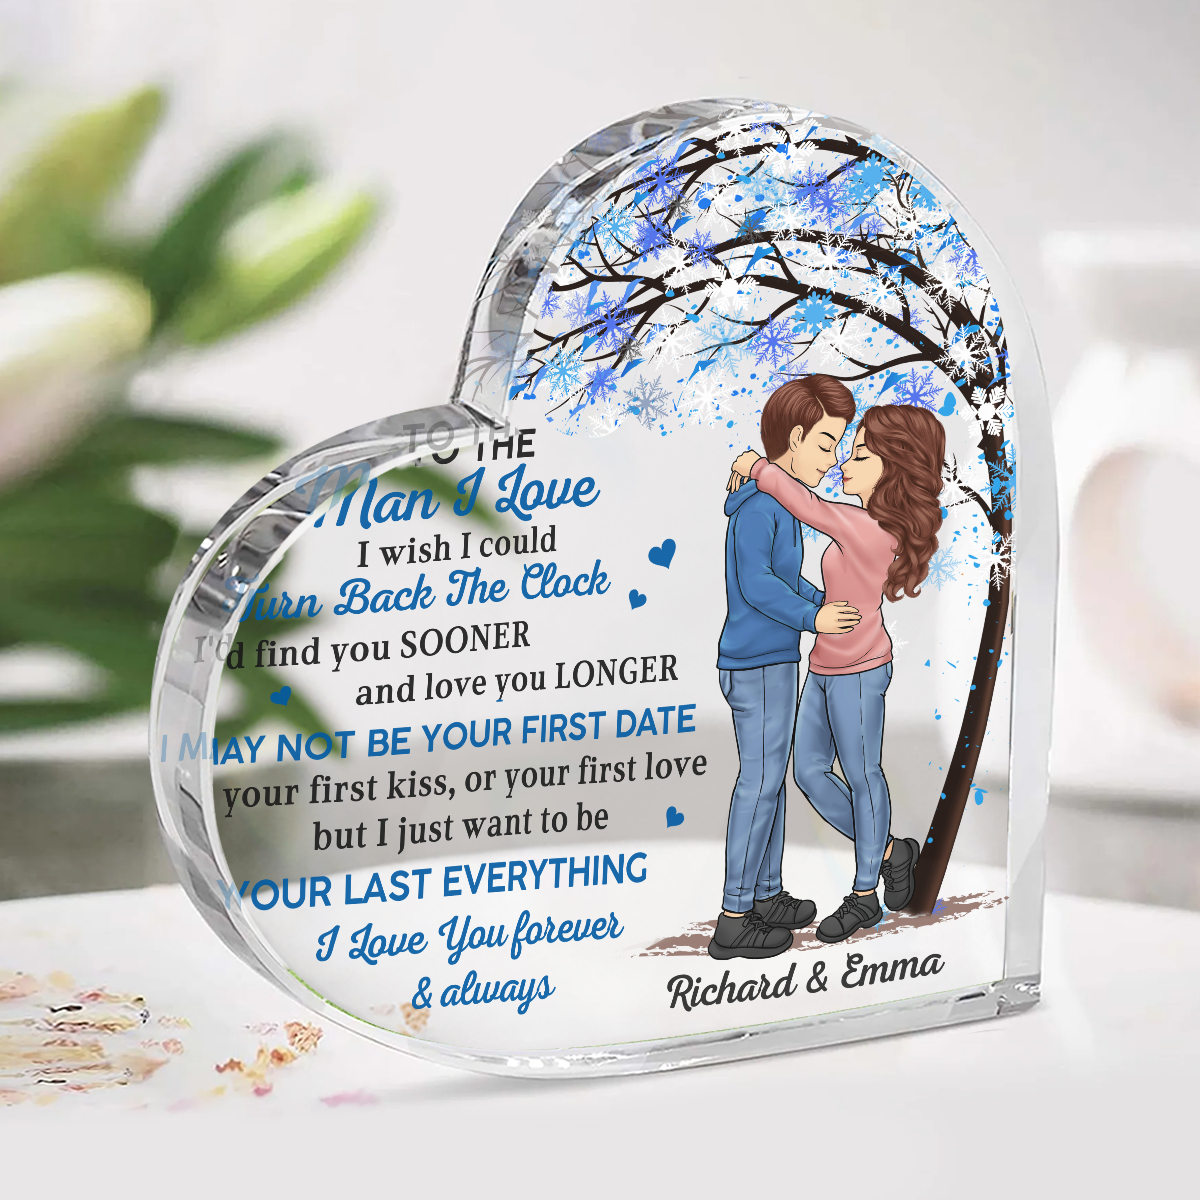 Together Since - Couple Personalized Custom Heart Shaped Acrylic Plaque -  Gift For Husband Wife, Anniversary